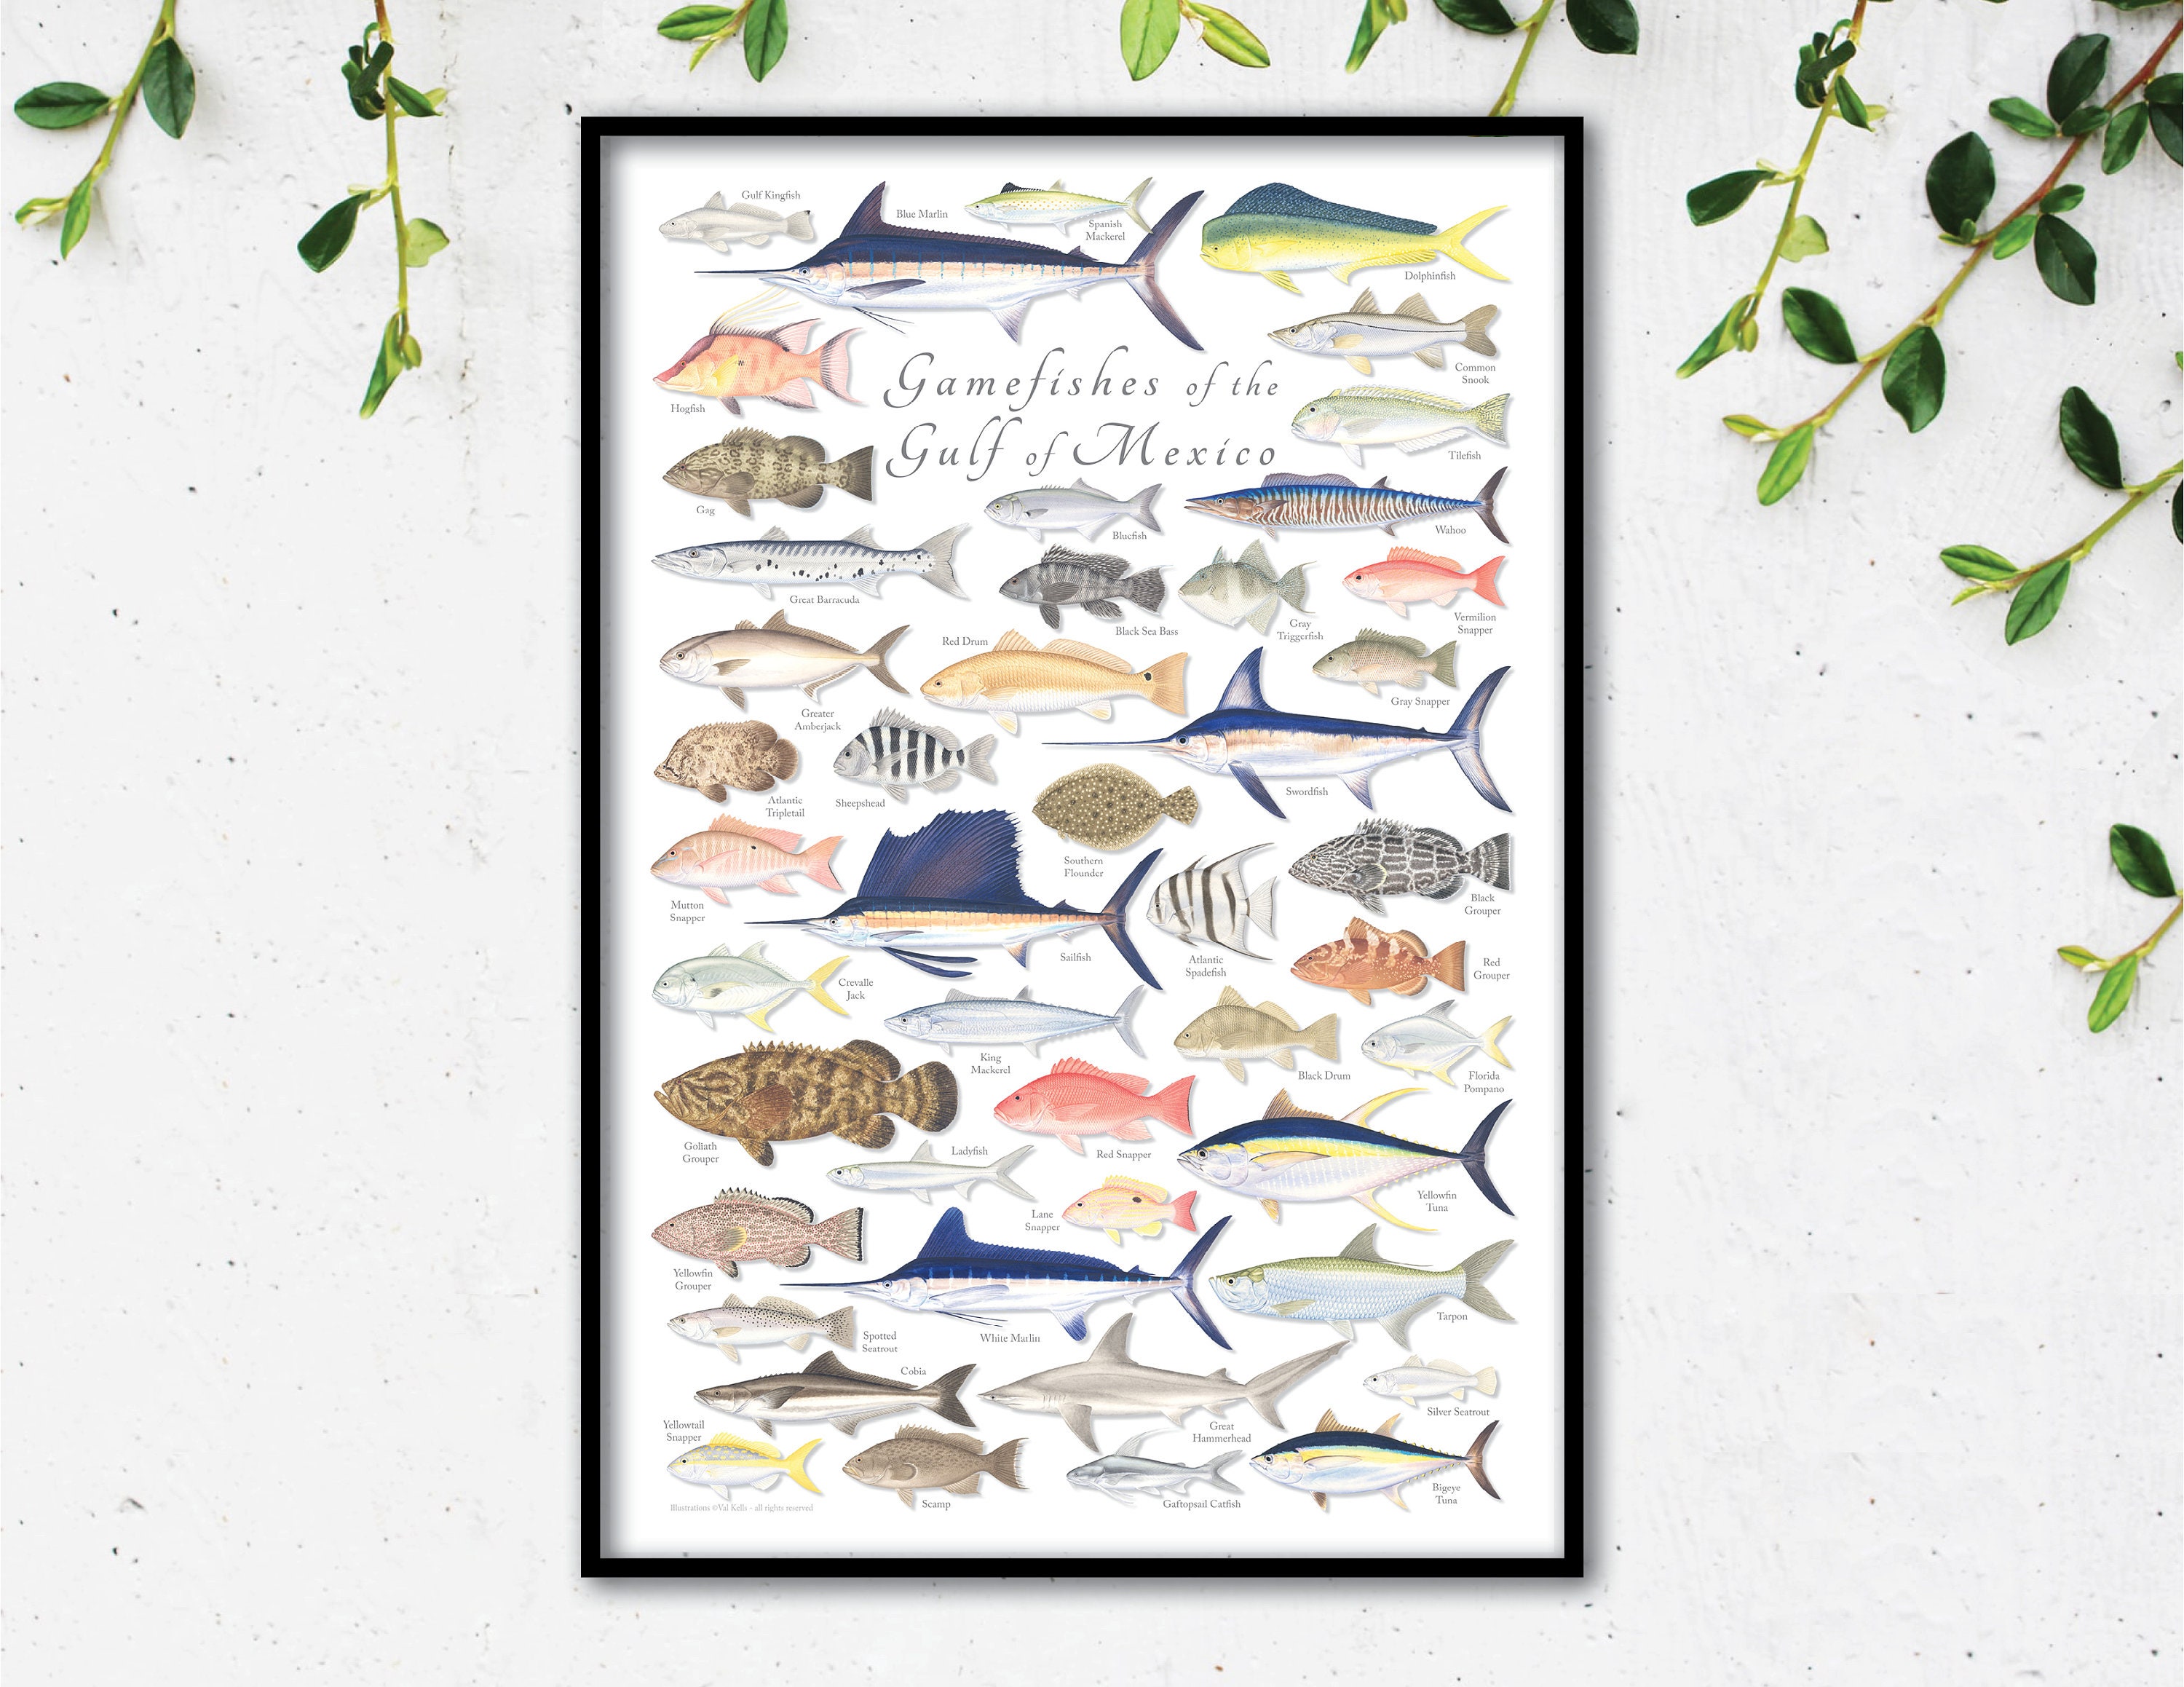 24x36 Gamefishes of the Gulf of Mexico Poster Gulf of Mexico Fish Poster, Gulf  of Mexico Gamefish Poster, Gulf Fish Poster, Gulf of Mexico 